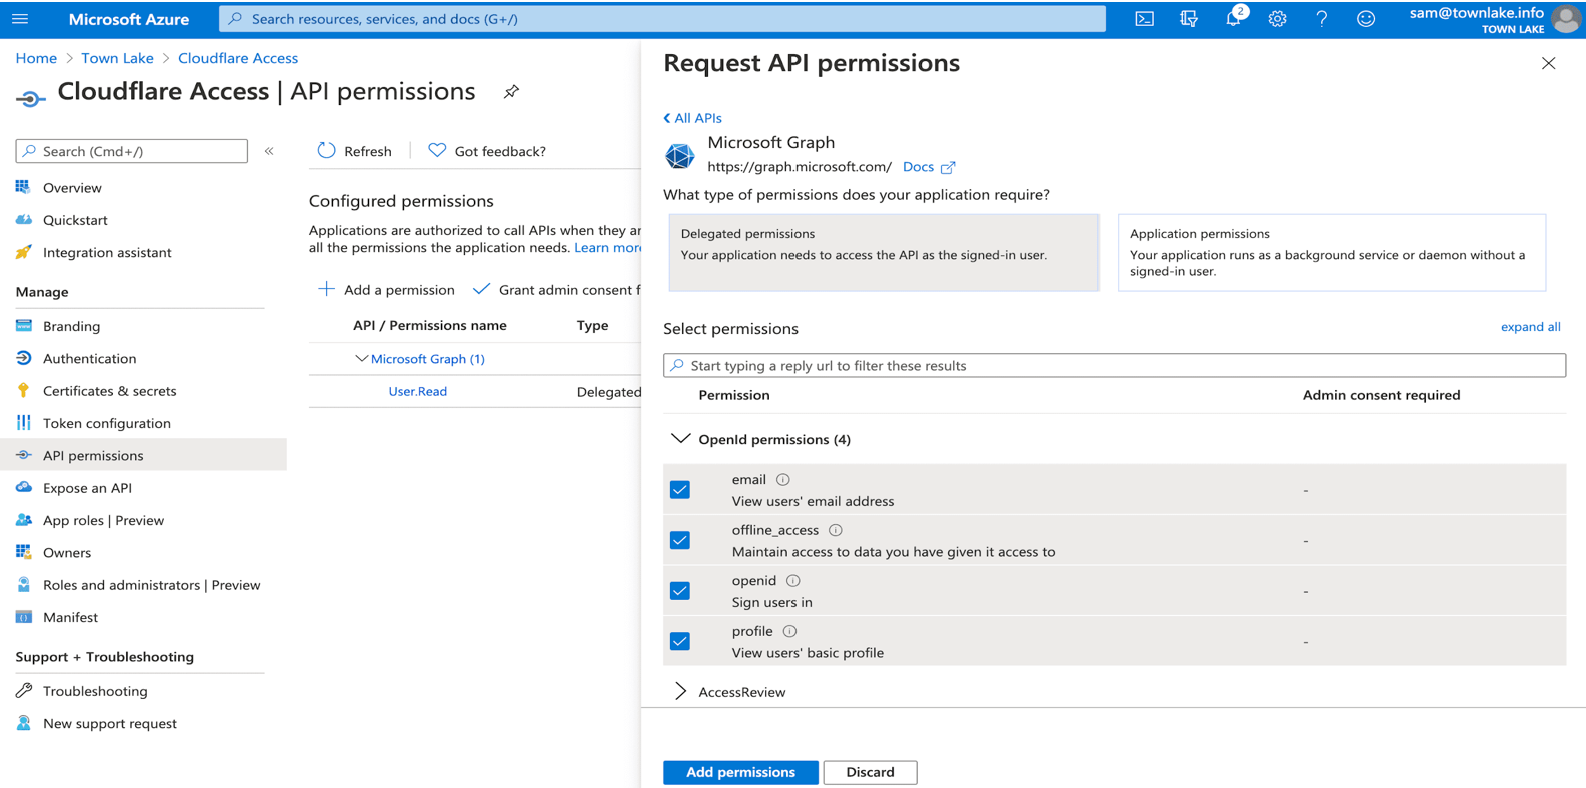 Screenshot options and selections for Request API permissions.